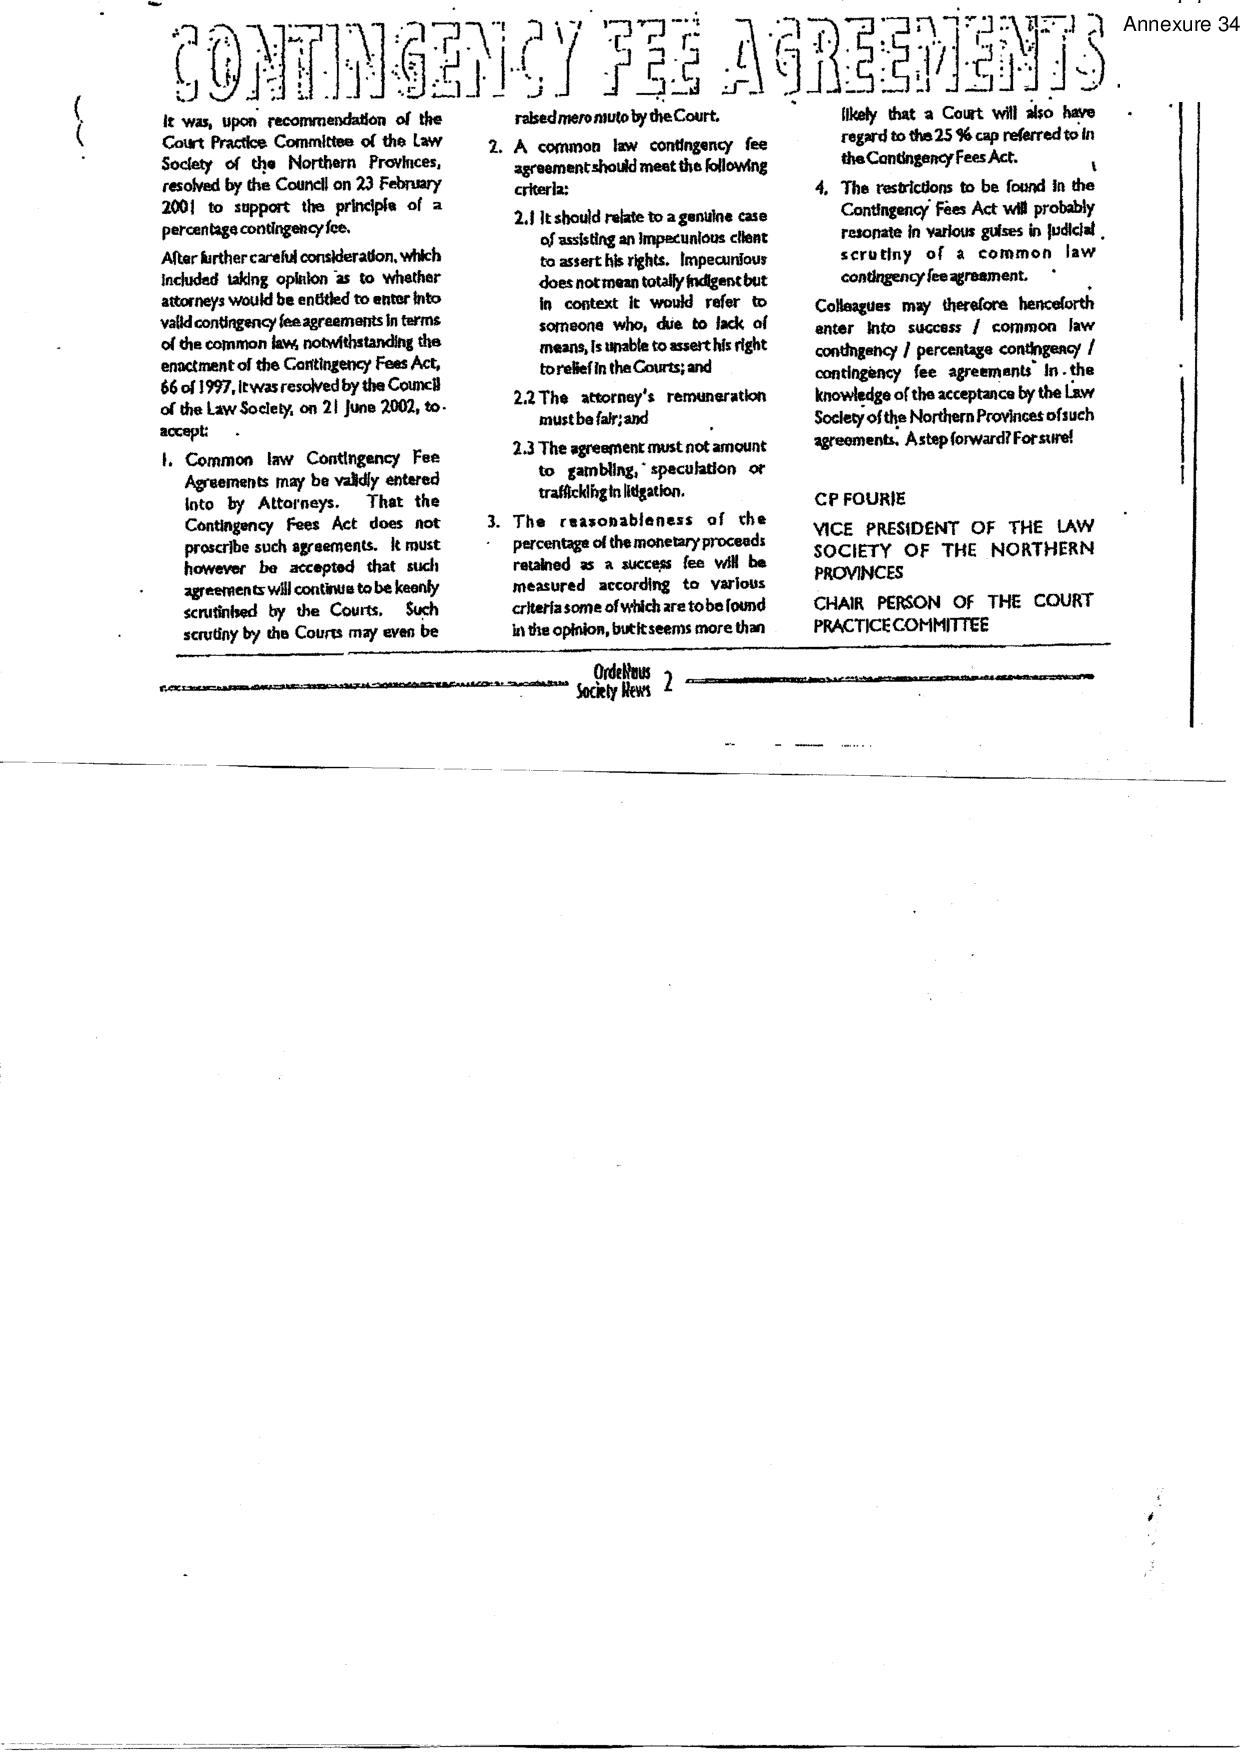 Annexure 34 Law Societys 1st ruling page 001